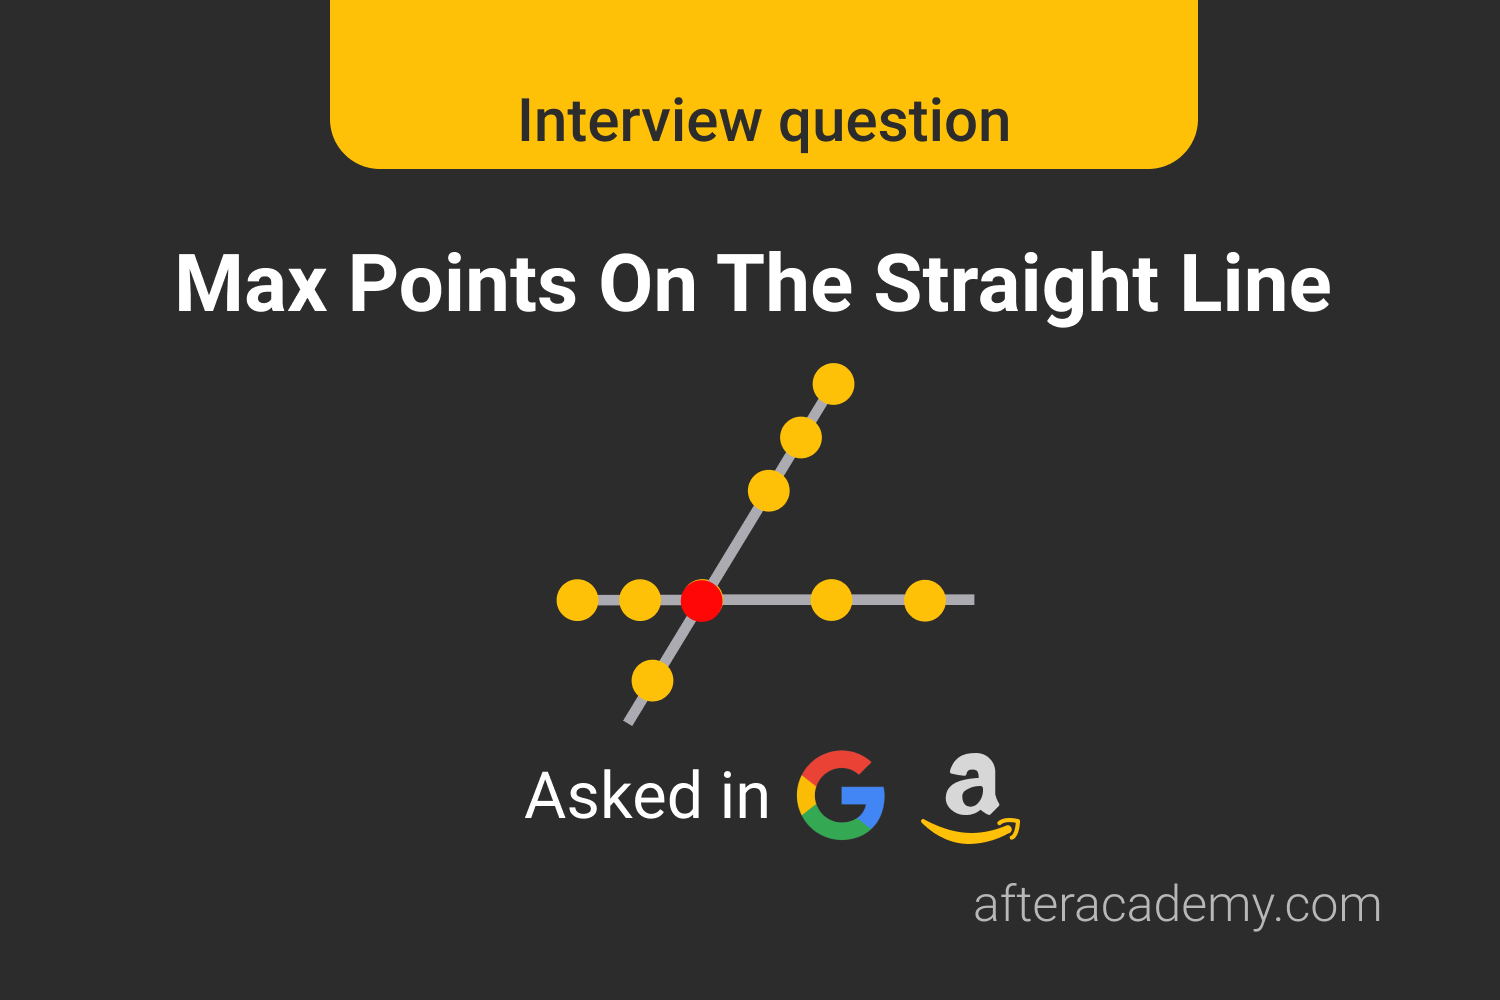 Max Points On The Straight Line